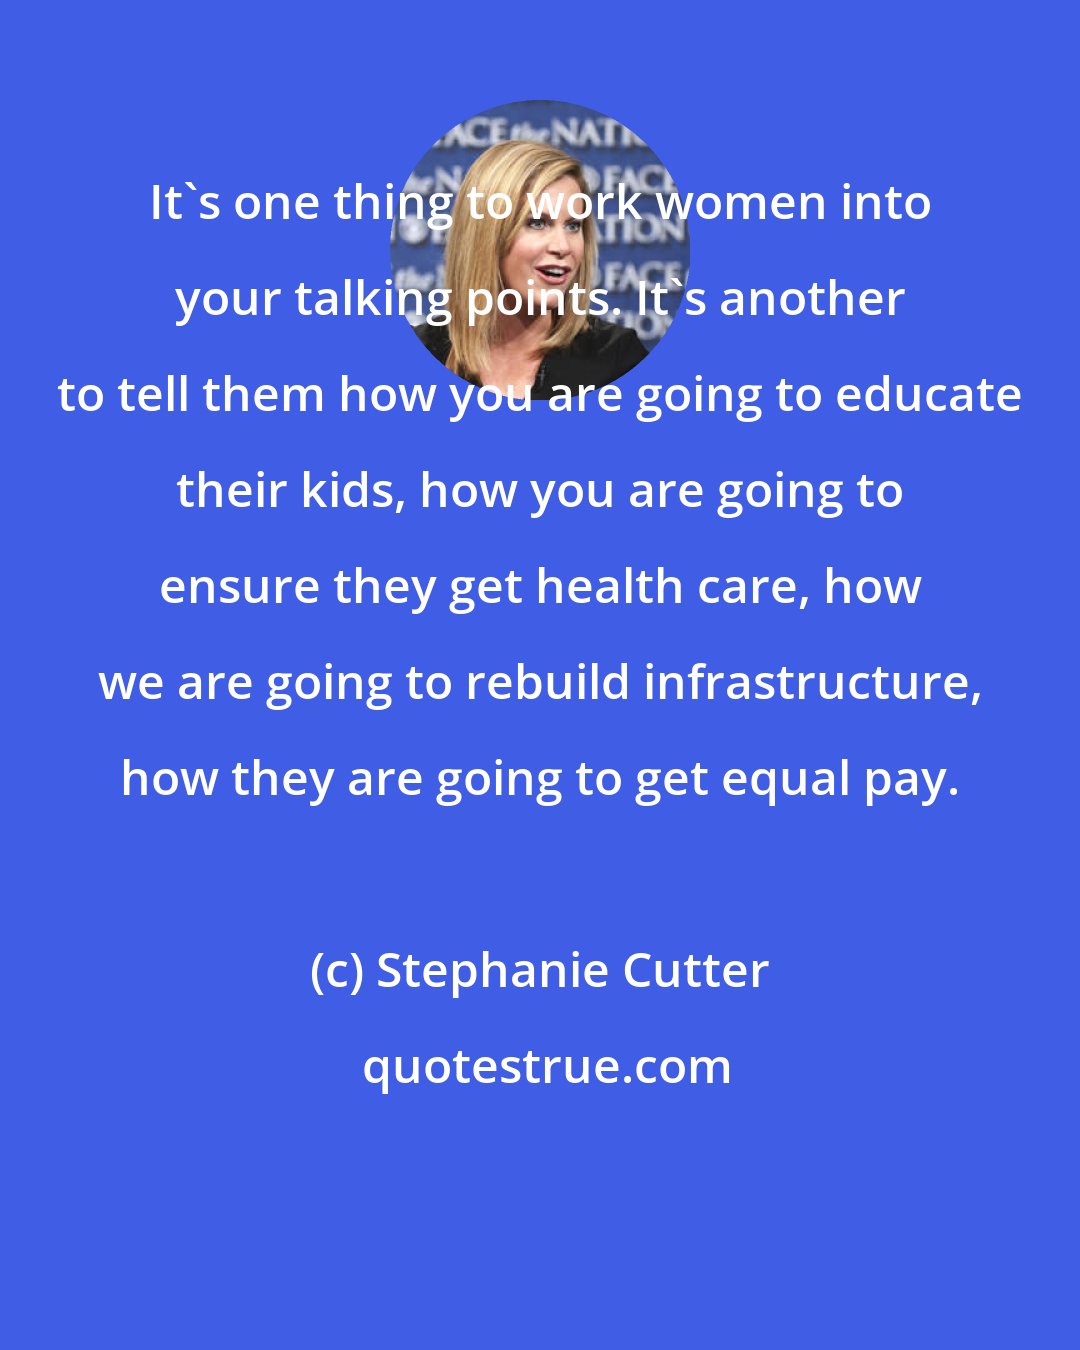 Stephanie Cutter: It's one thing to work women into your talking points. It's another to tell them how you are going to educate their kids, how you are going to ensure they get health care, how we are going to rebuild infrastructure, how they are going to get equal pay.